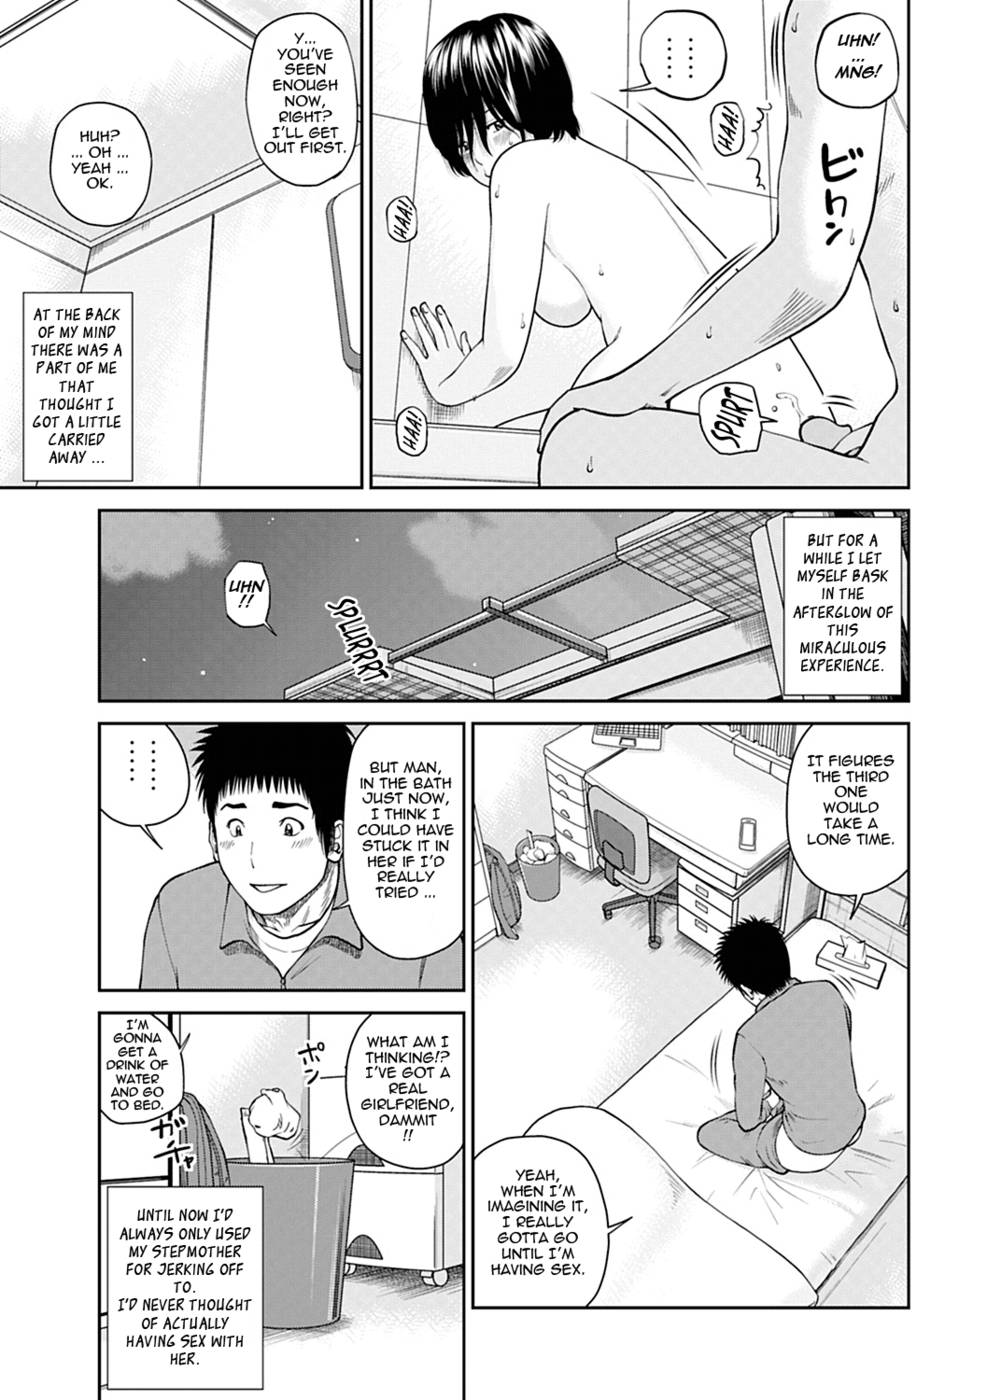 Hentai Manga Comic-34 Year Old Unsatisfied Wife-Chapter 6-Naked Stepmother-First Half-17